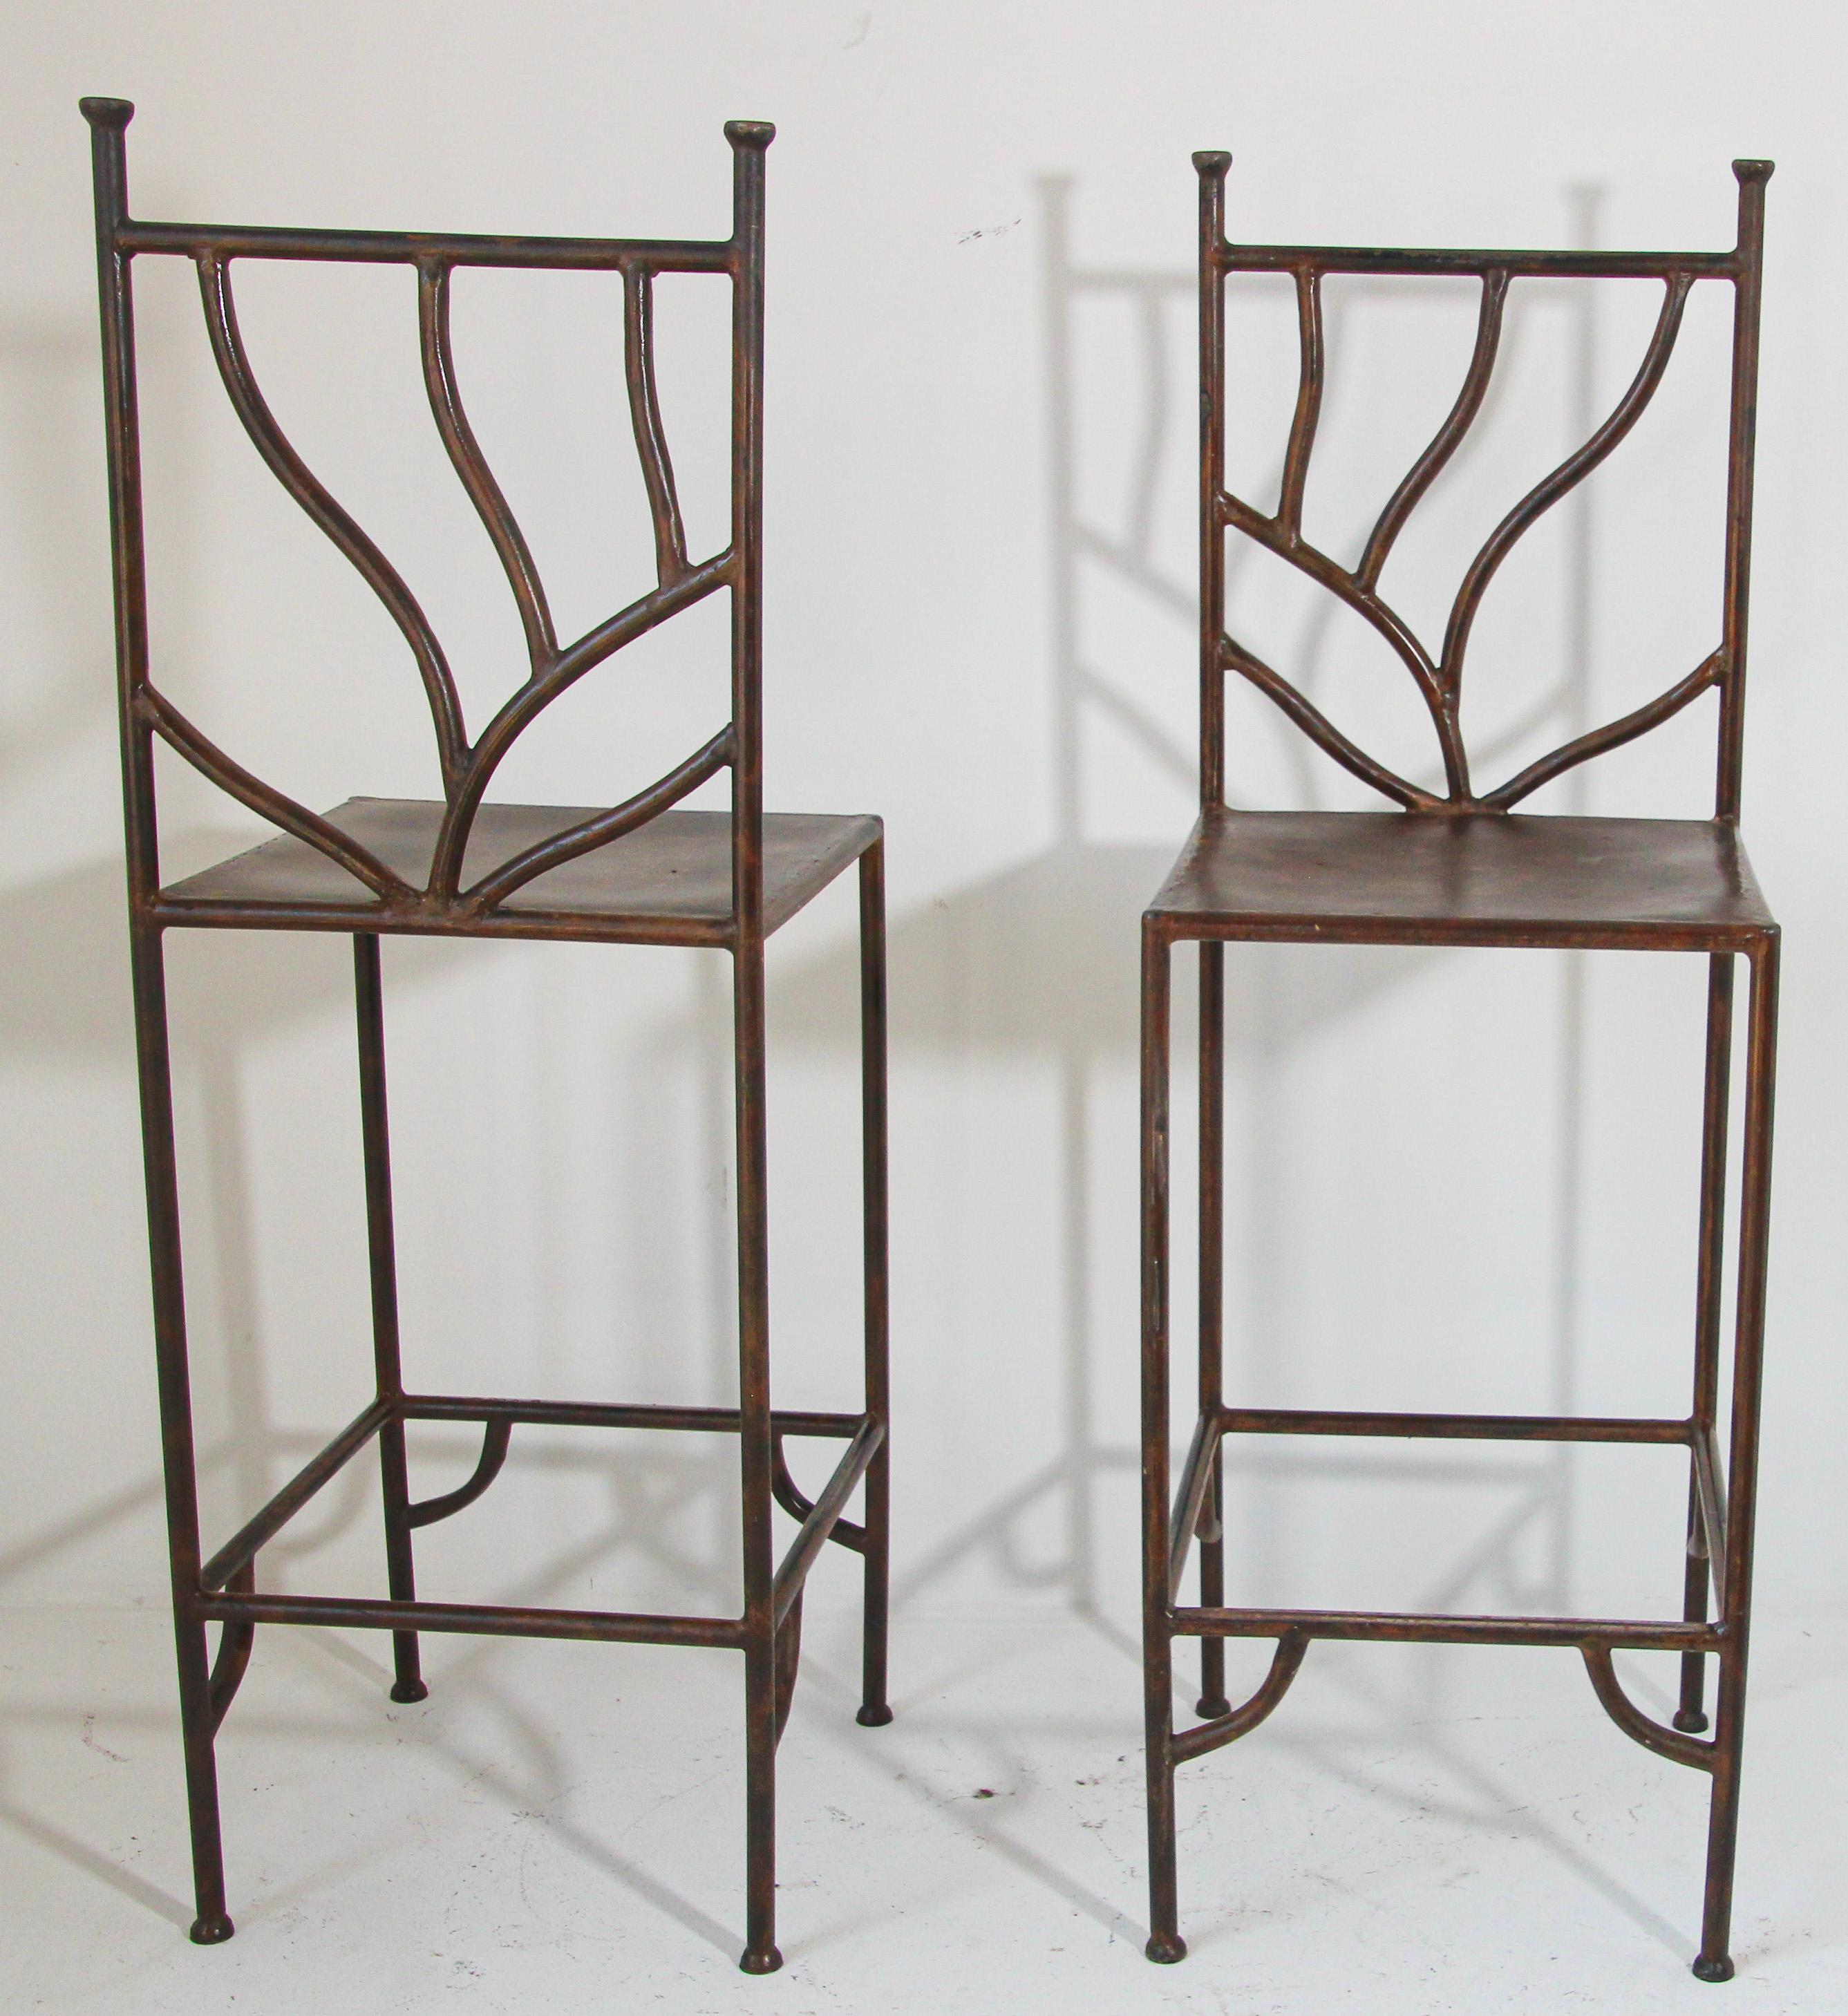 Spanish Colonial Vintage Wrought Iron Barstools with Back Set of Two Spanish Revival For Sale